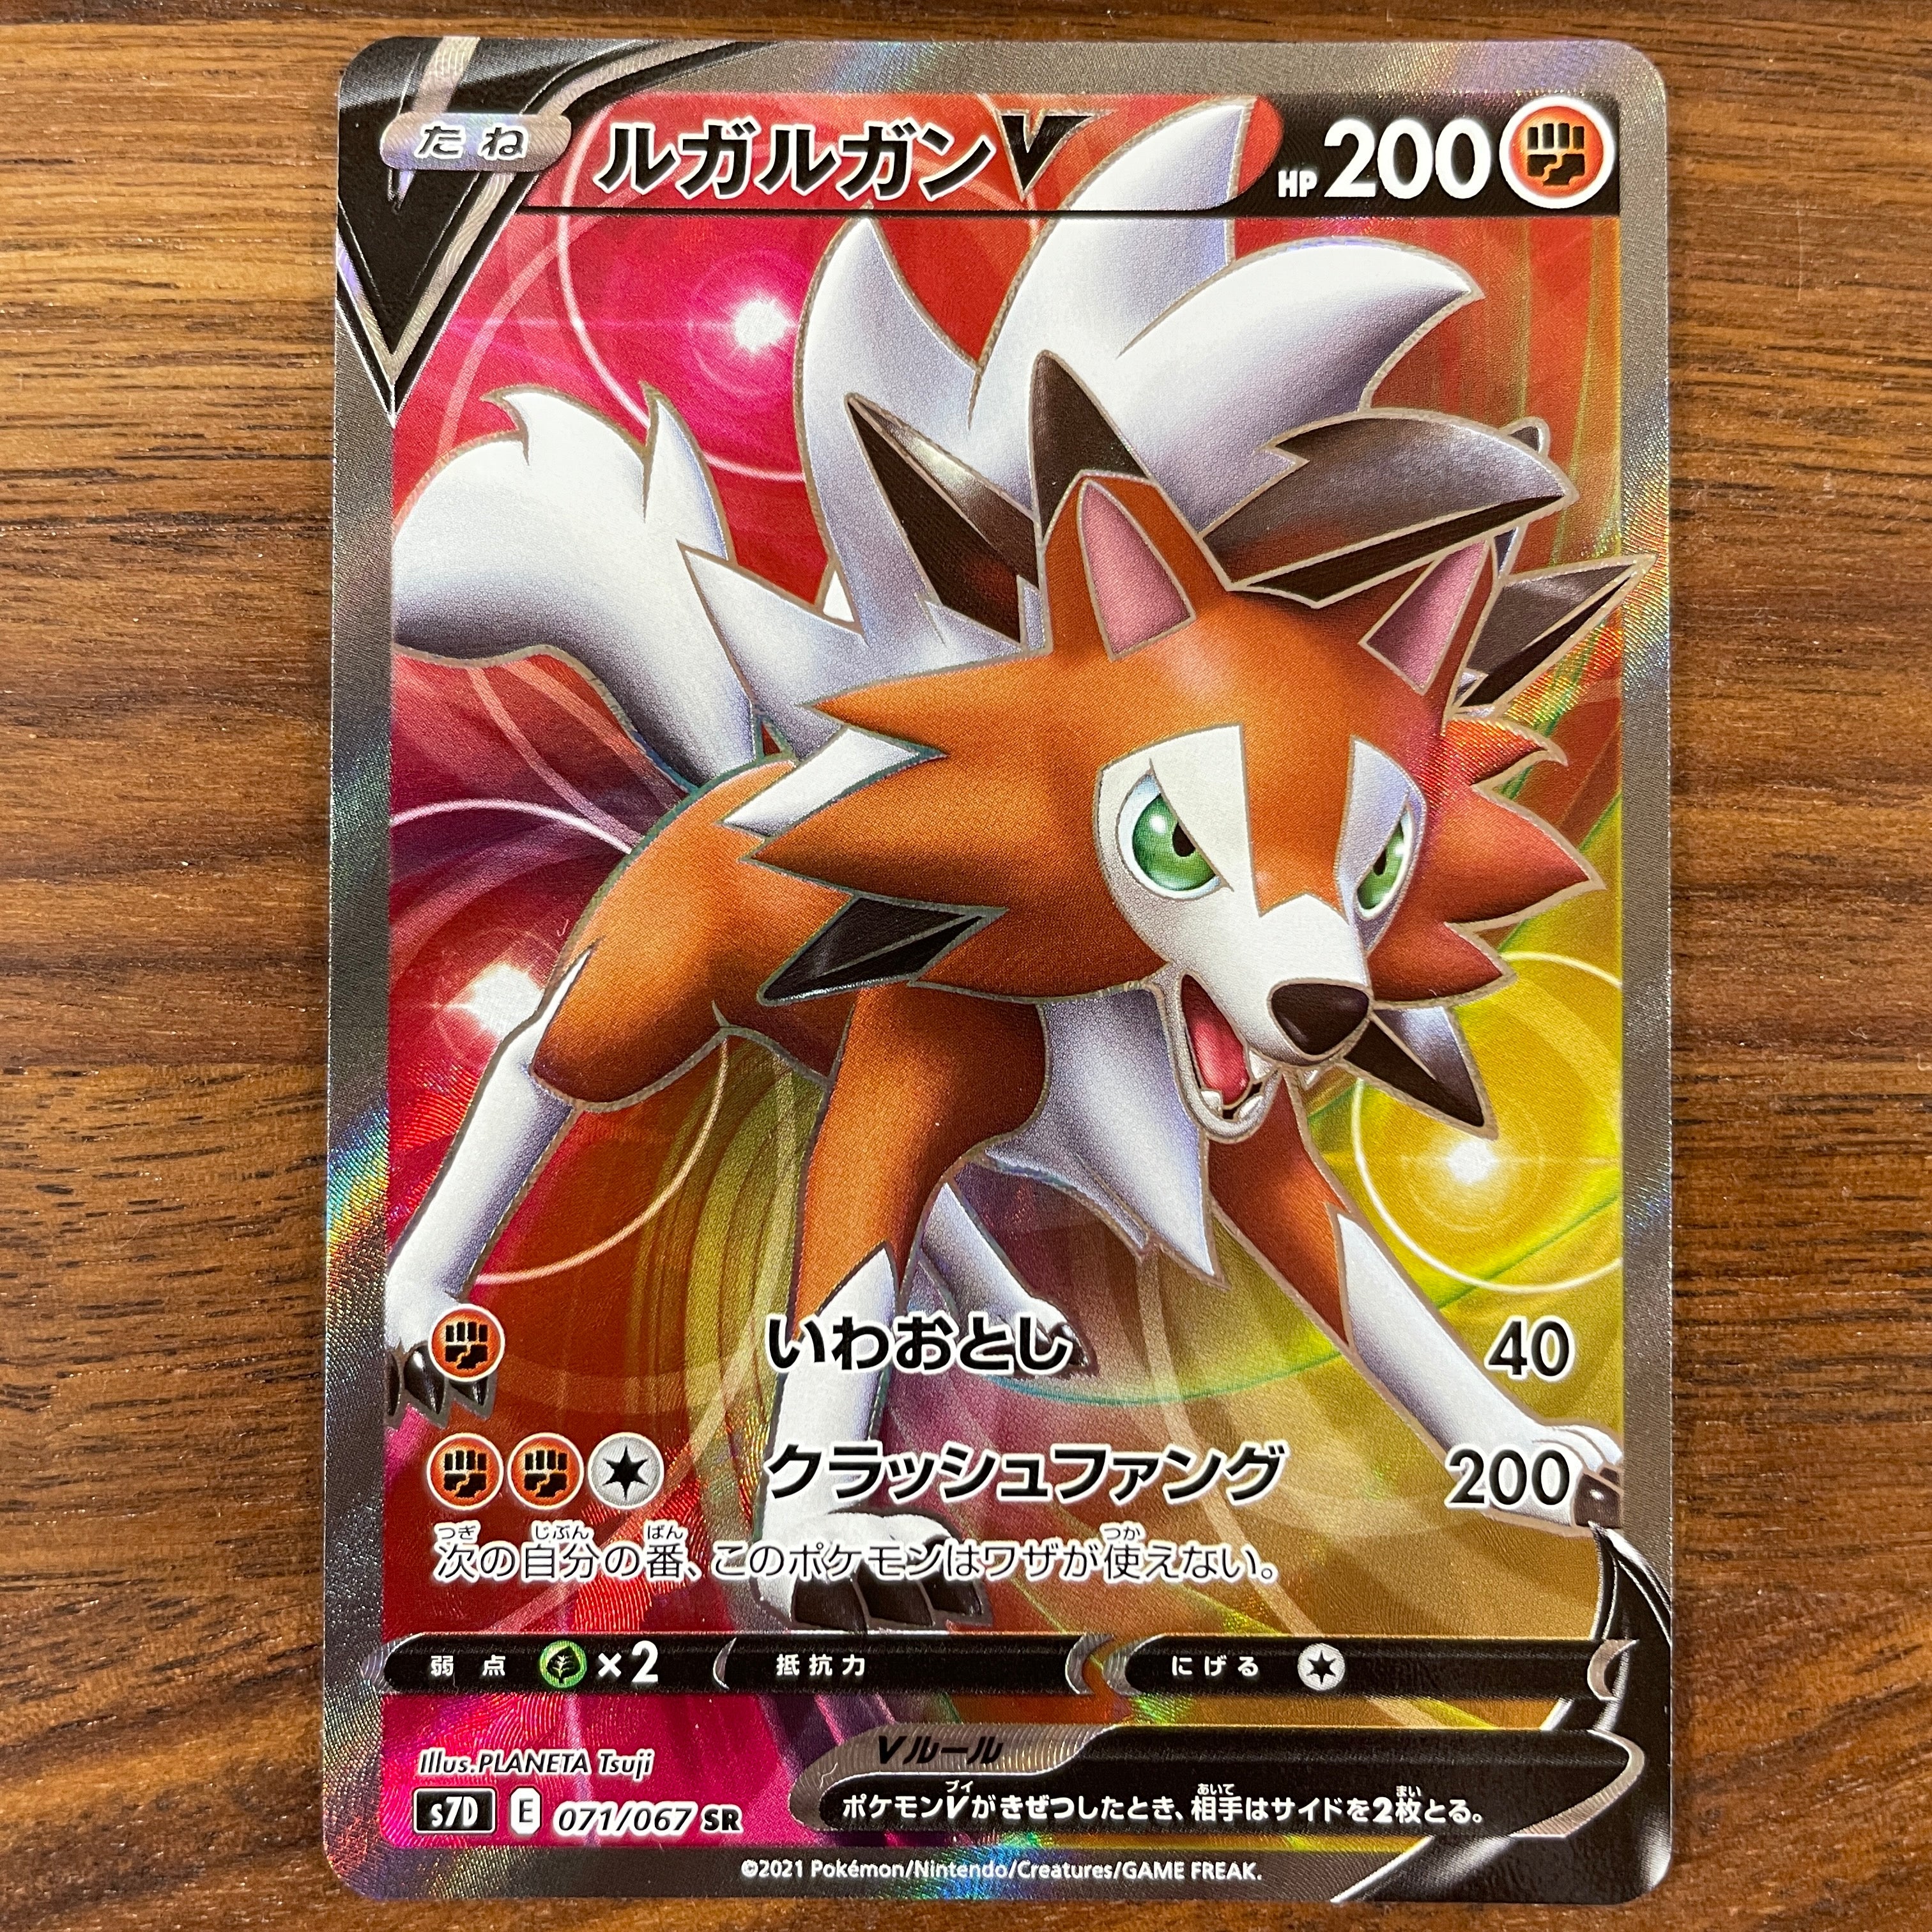 POKÉMON CARD GAME Sword & Shield Expansion pack ｢Skyscraping Perfect｣  POKÉMON CARD GAME S7D 071/069 Super Rare card  Lycanroc V